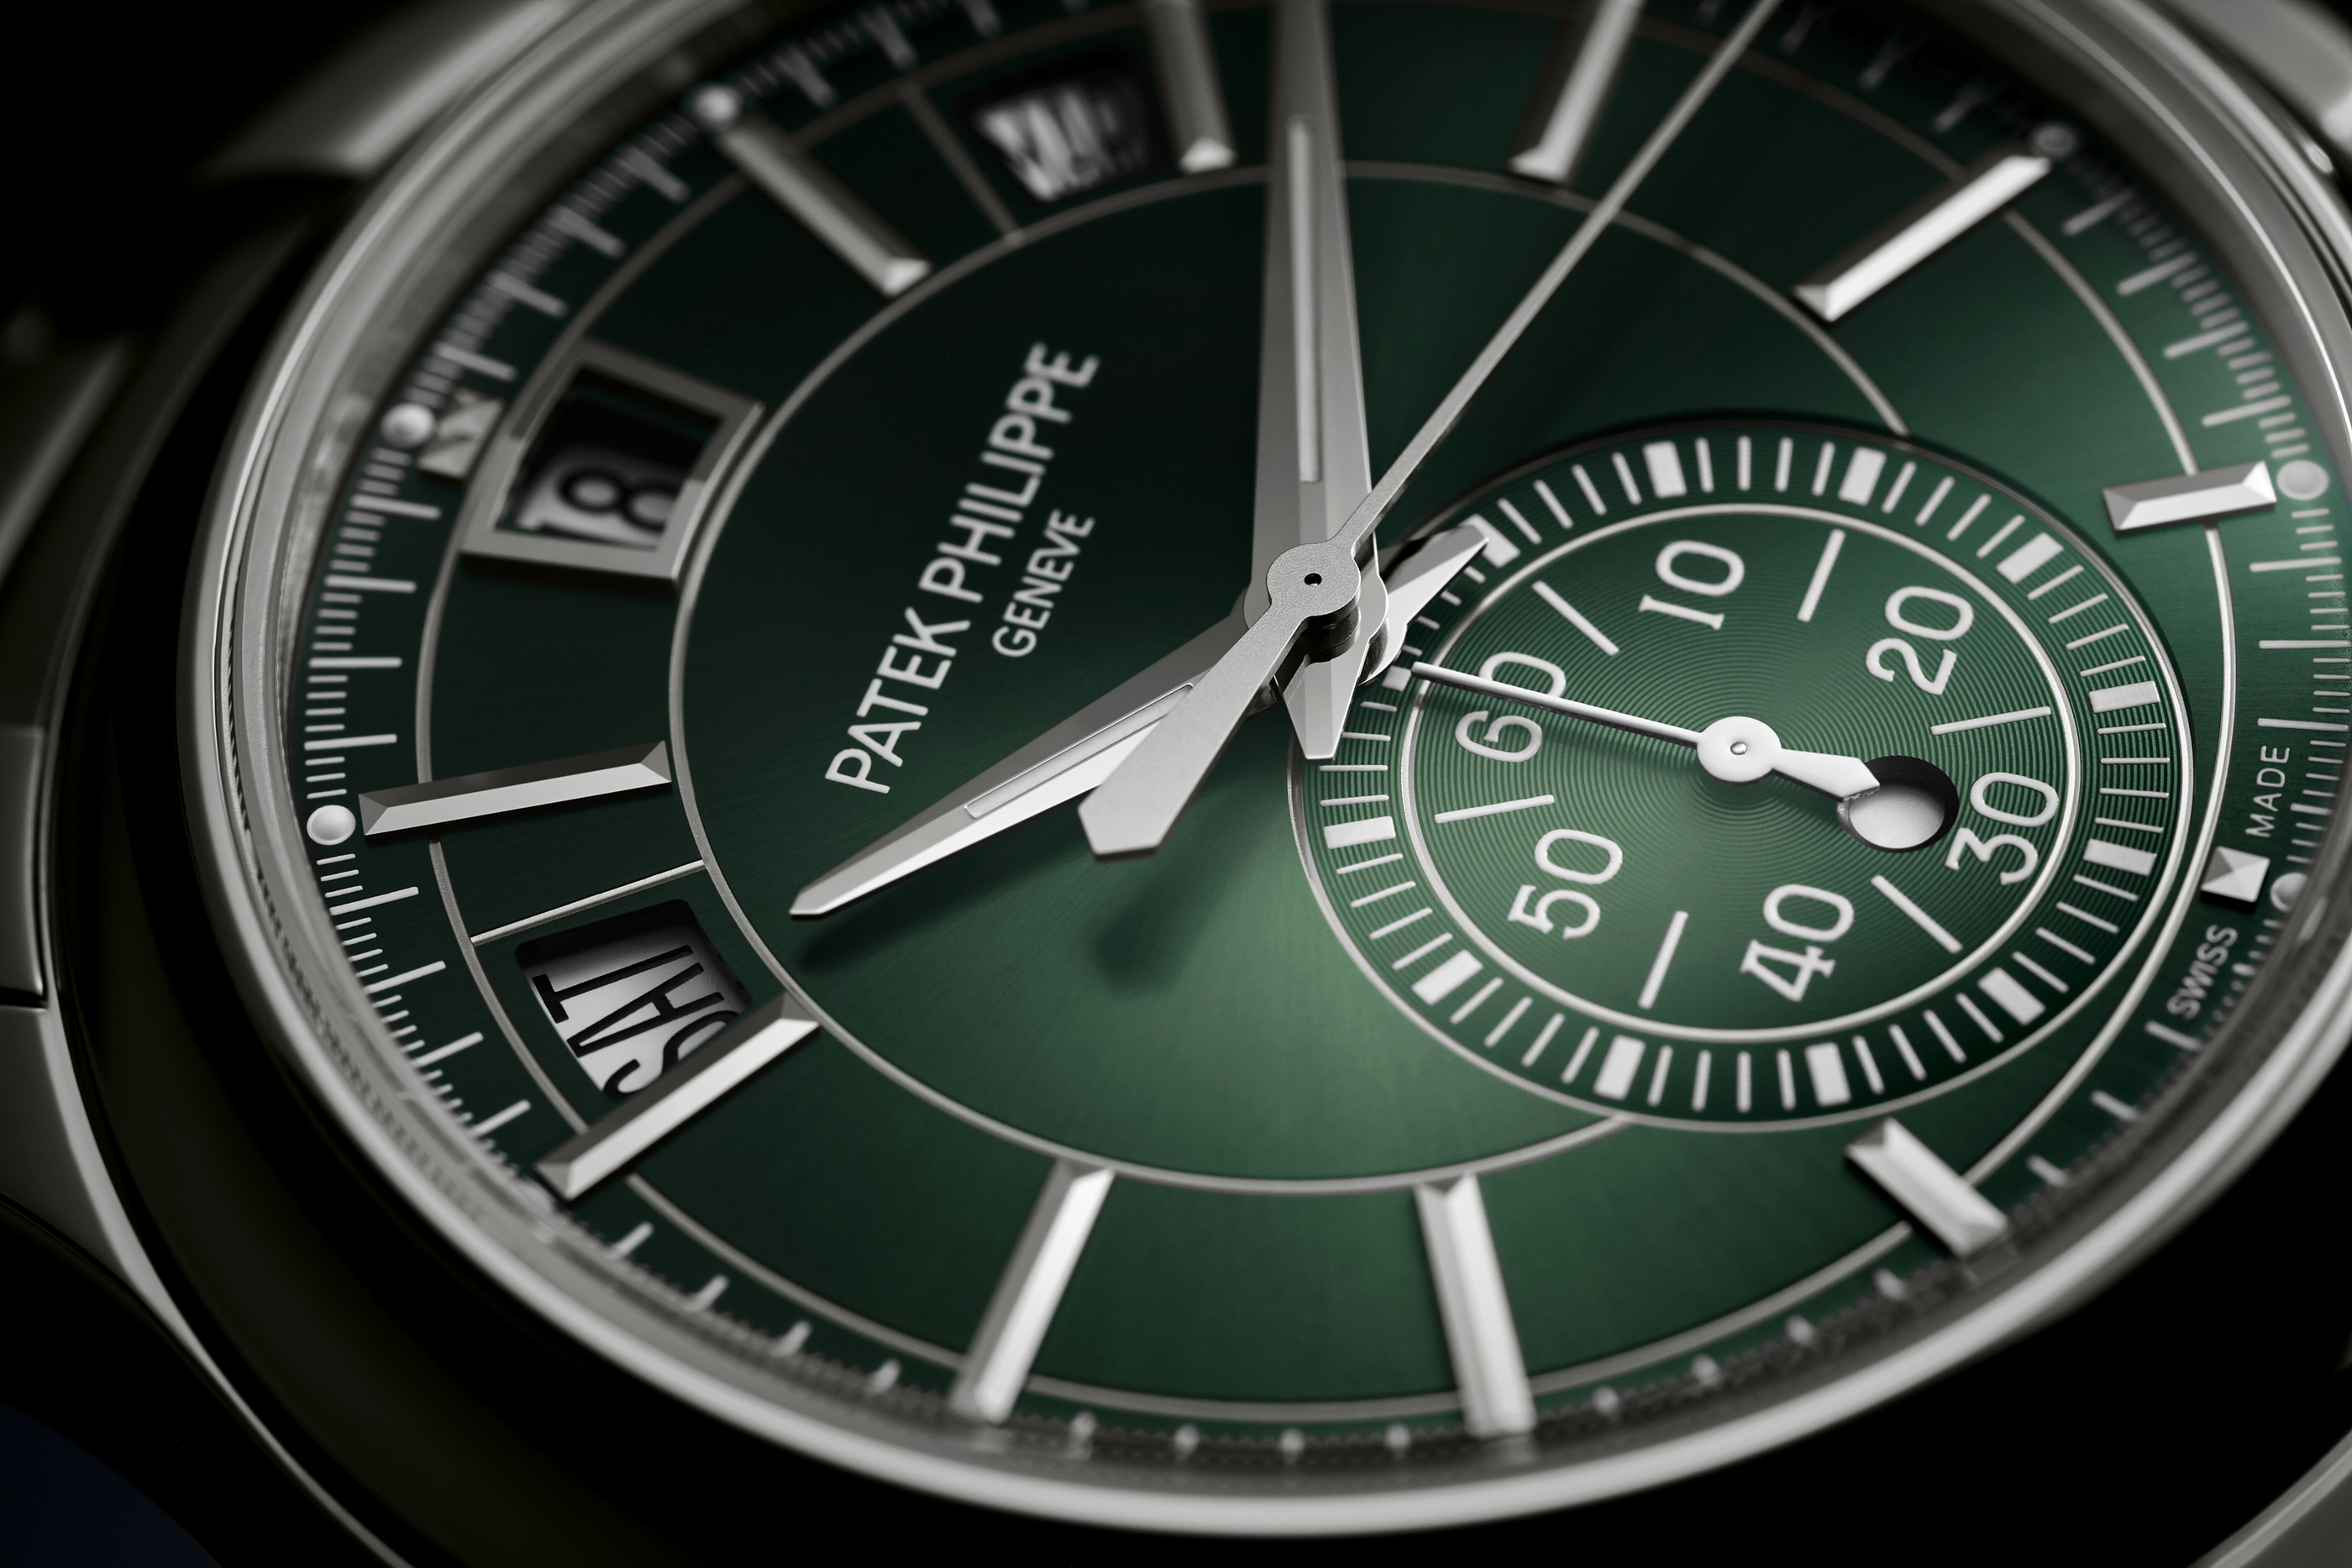 COMPLICATIONS SELF-WINDING - FLYBACK CHRONOGRAPH, ANNUAL CALENDAR